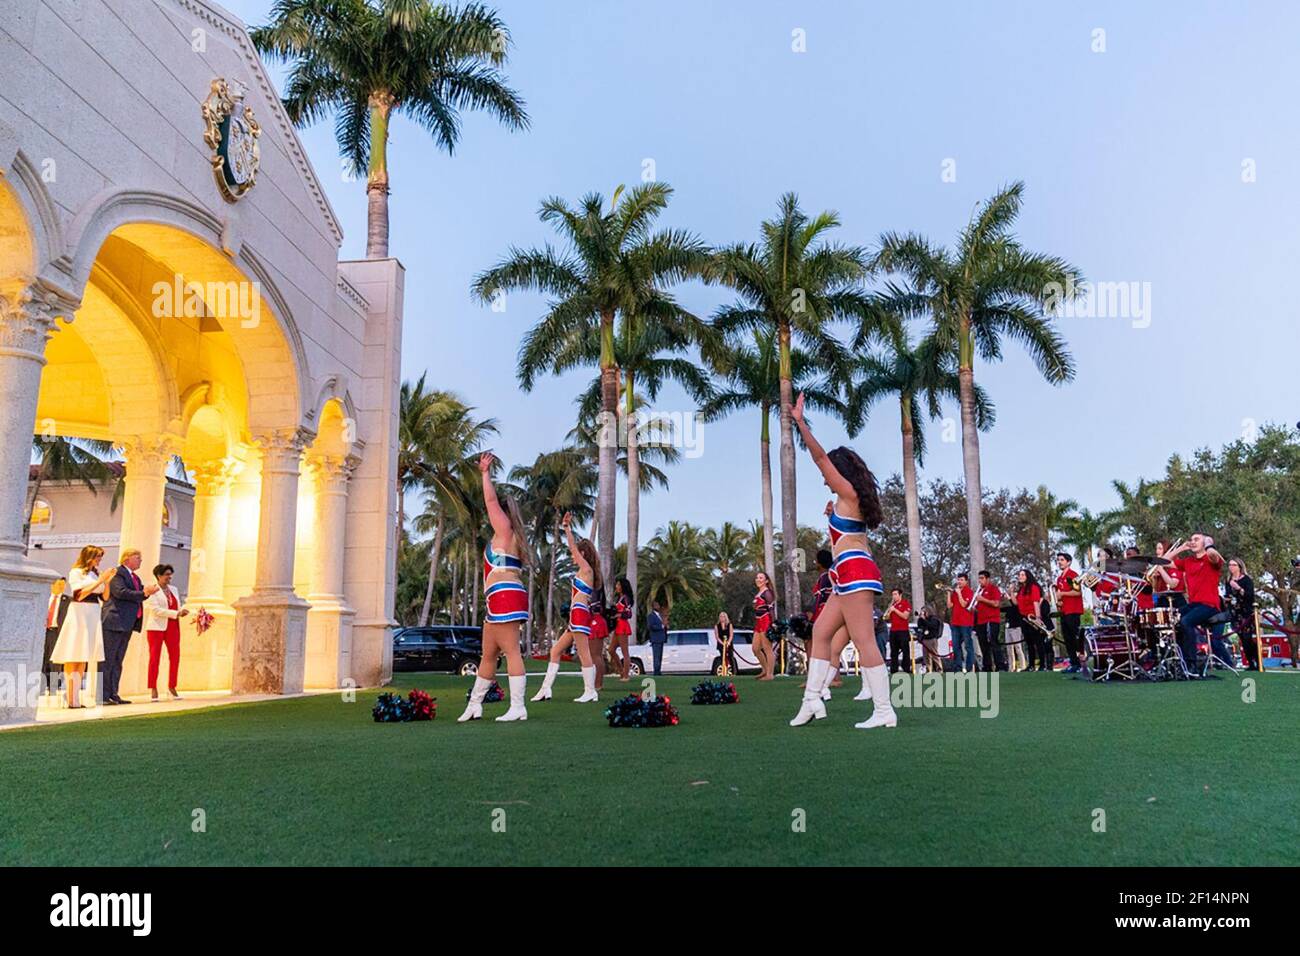 President Donald Trump and First Lady Melania Trump listen to the members of the Florida Atlantic University marching band Sunday evening Feb. 2 2020 outside the Trump International Golf Club in West Palm Beach Fla. prior to attending a Super Bowl party. Stock Photo